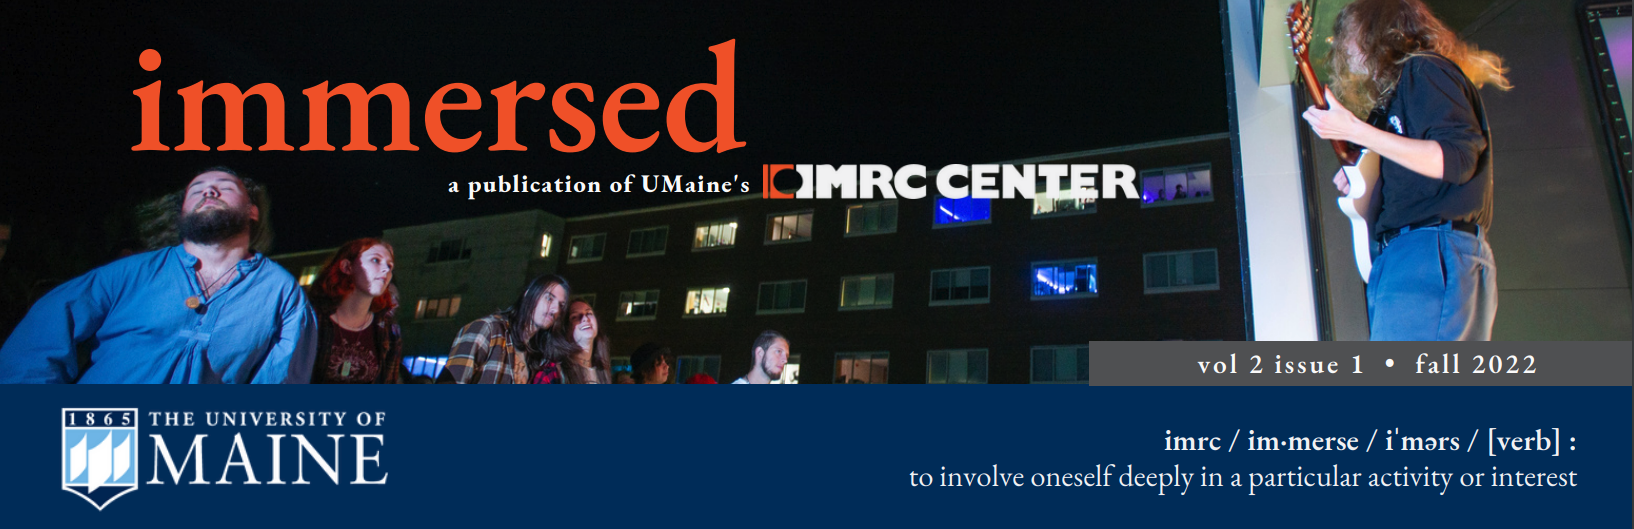 IMRC Center Immersed Newsletter Banner With Logo and Photo of people dancing and playing music outside the IMRC Center theater window